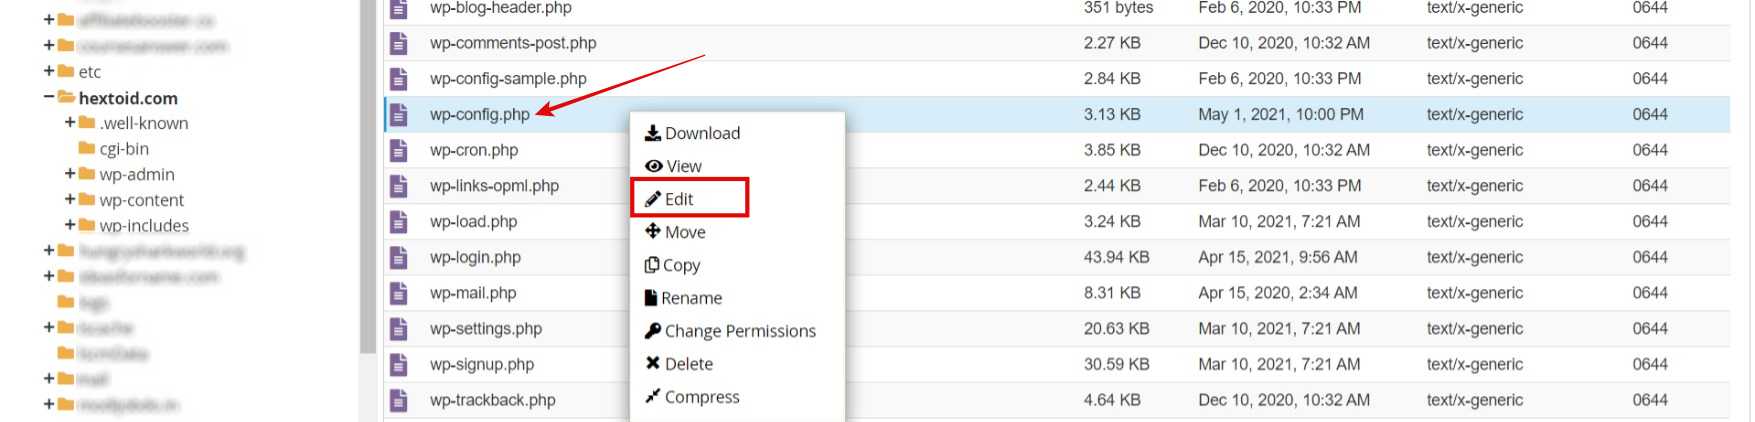 Navigate to the domain folder in file manager > Find wp-config.php file > Right-click & edit